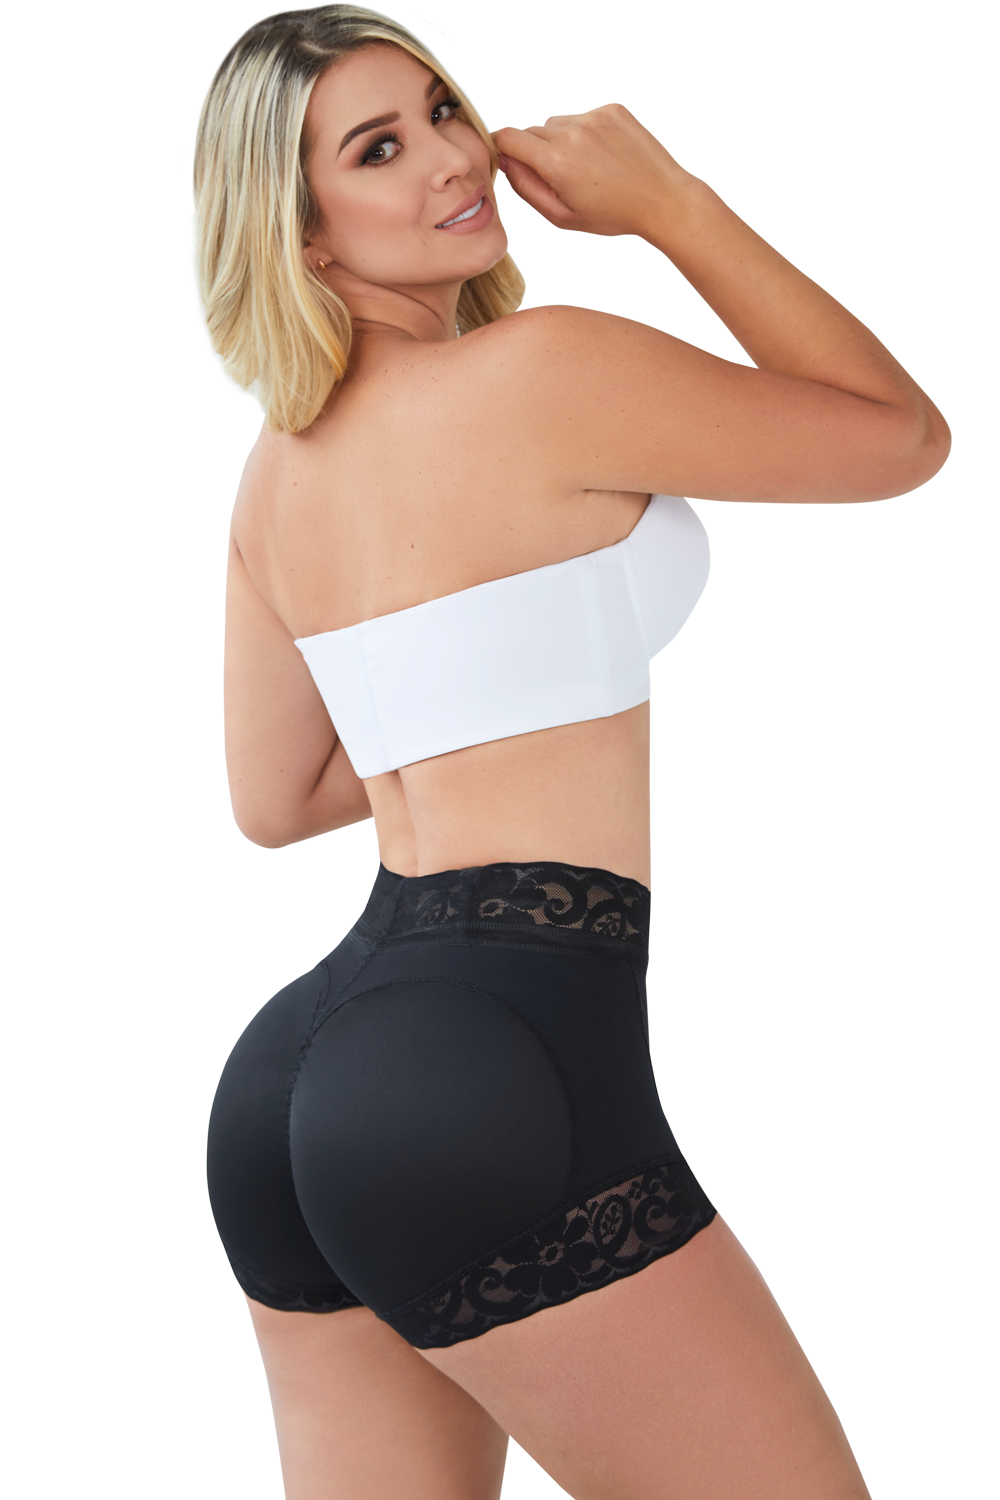 👀 Boost Your Curves with Jackie London's Panty Gluteus Enhancer